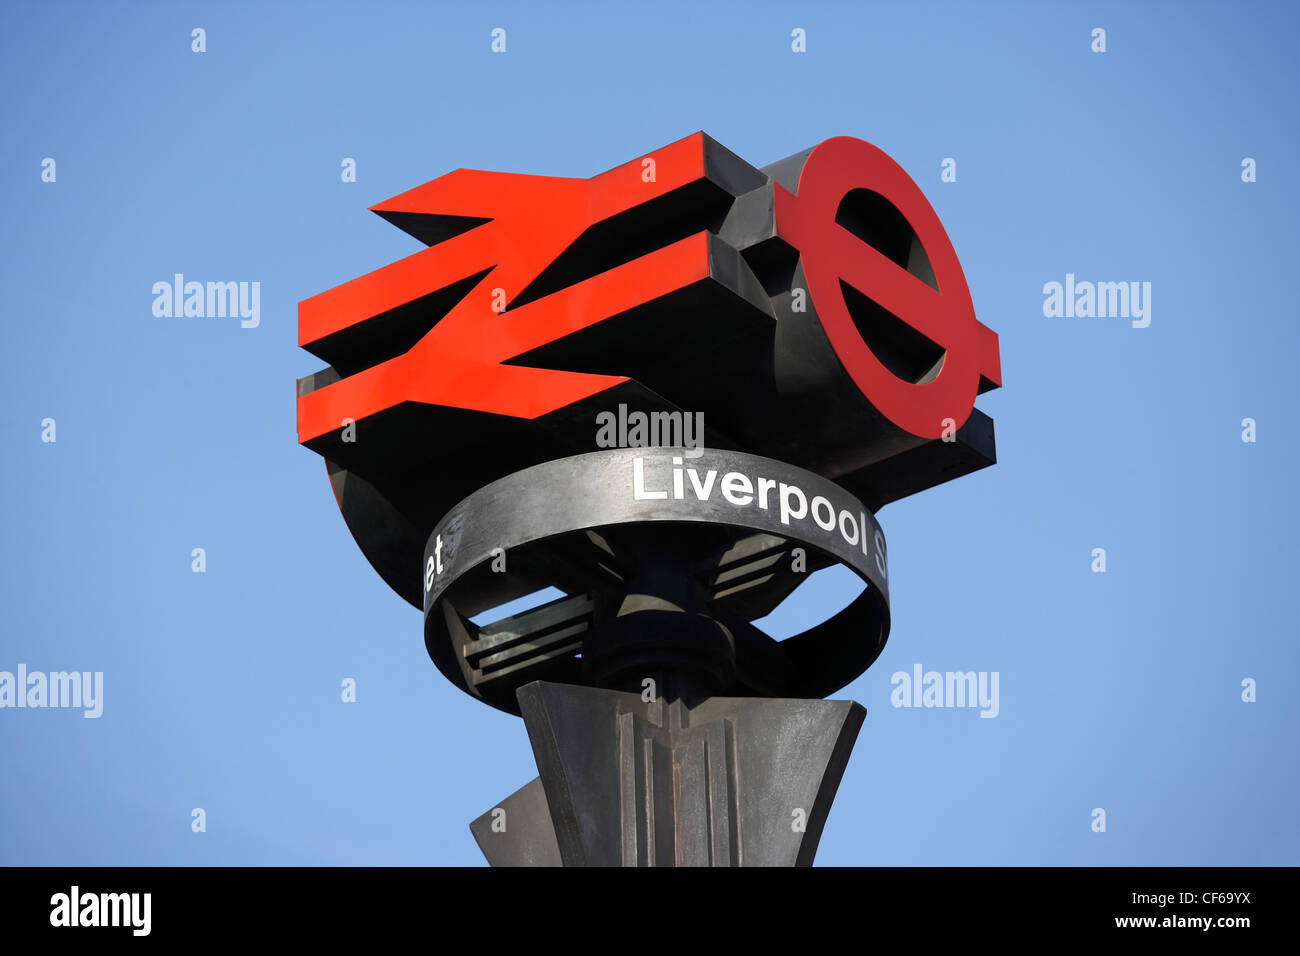 A detailed view of the Liverpool Street train station logo. Stock Photo